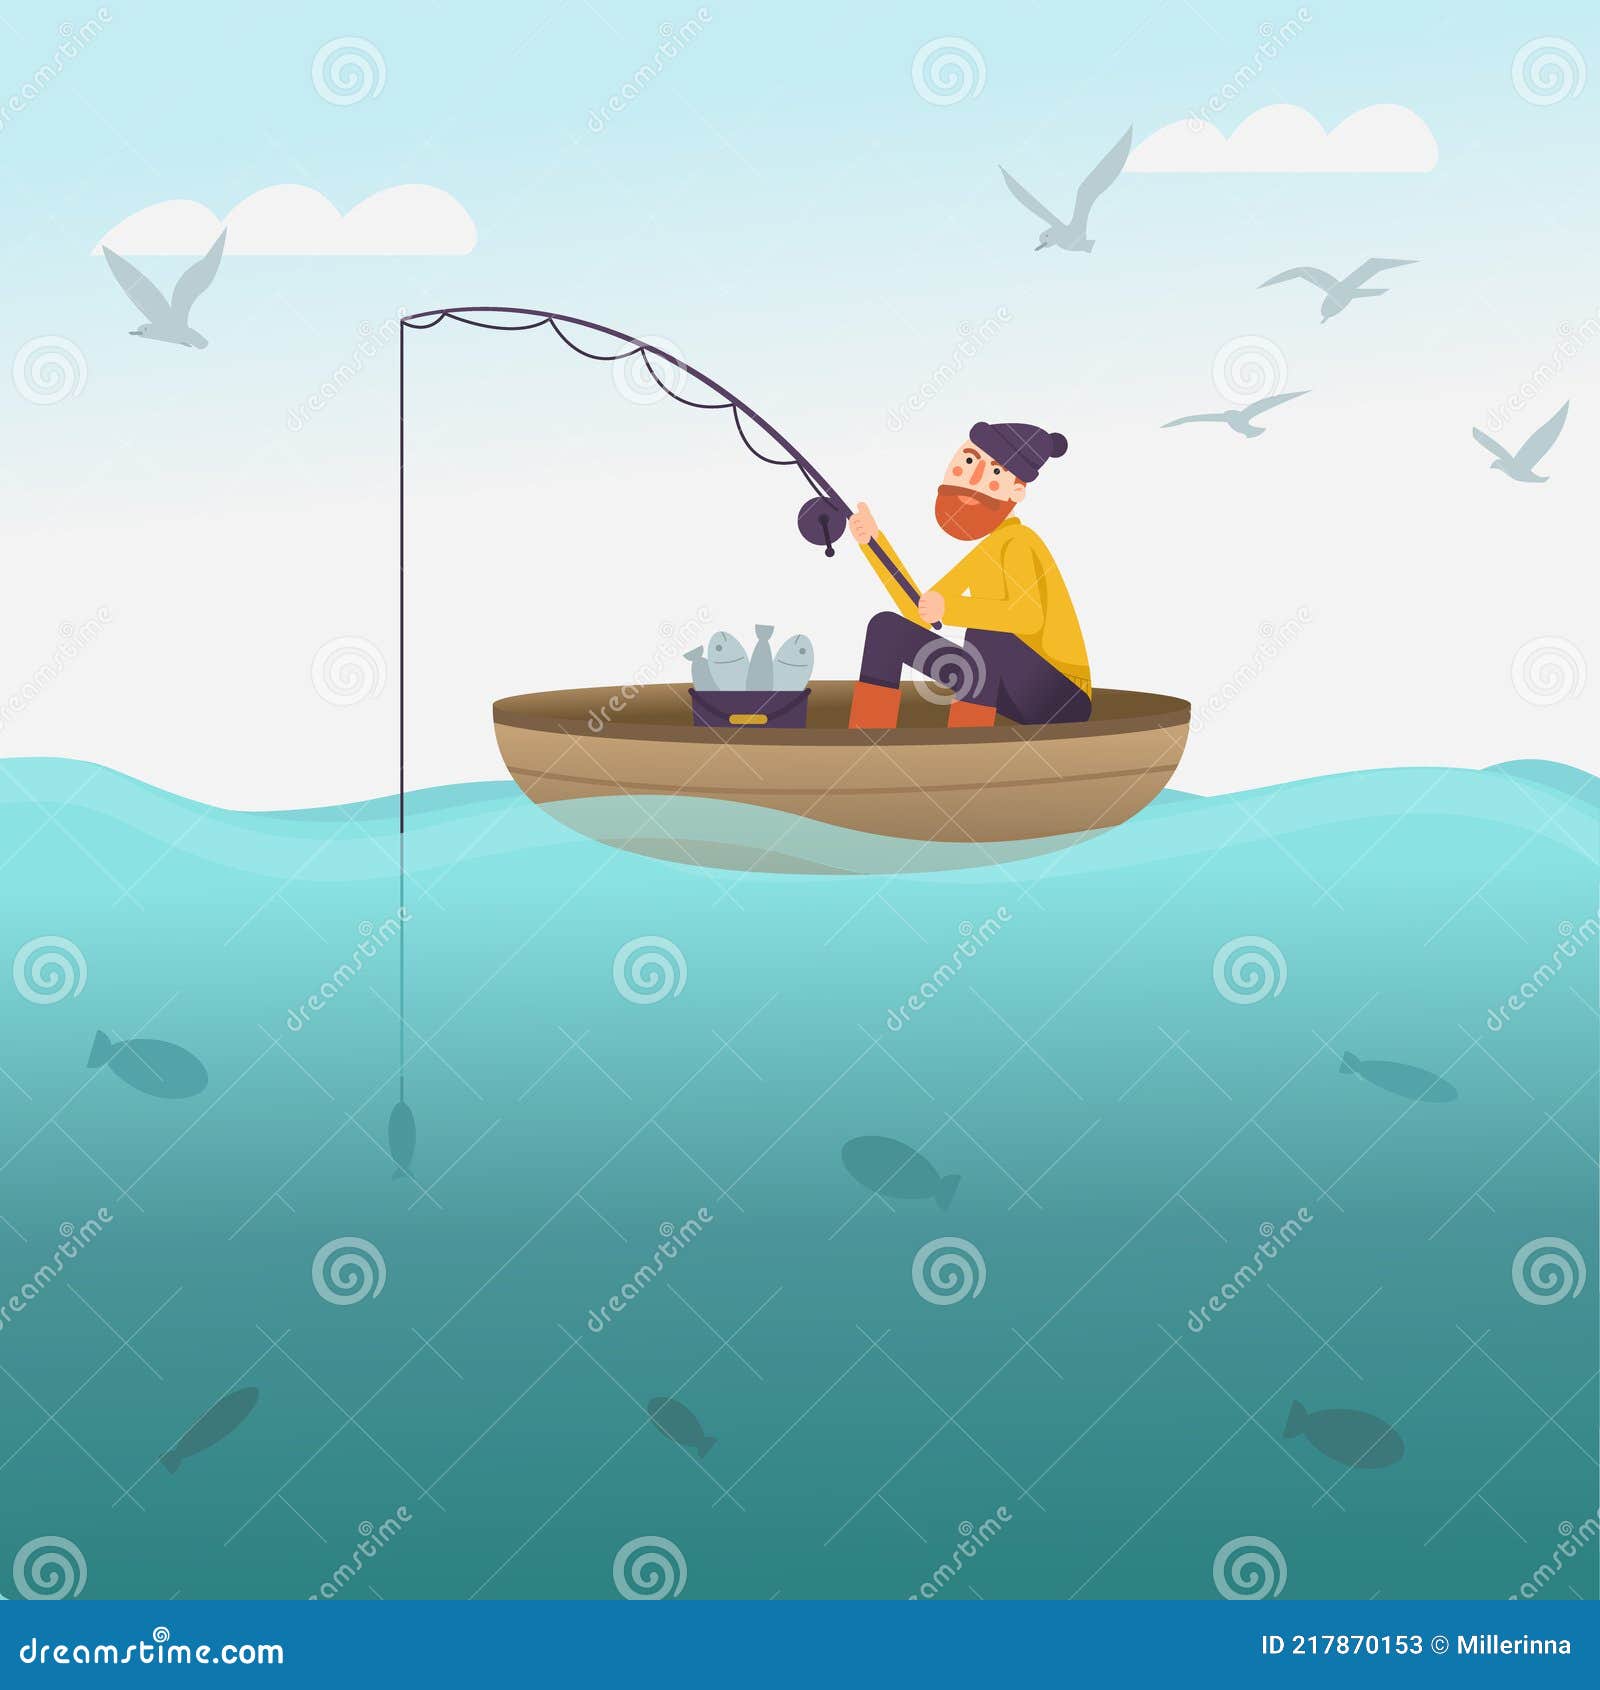 Fisherman with Fishing Rod on the Boat. Sea Scenery with Fisher